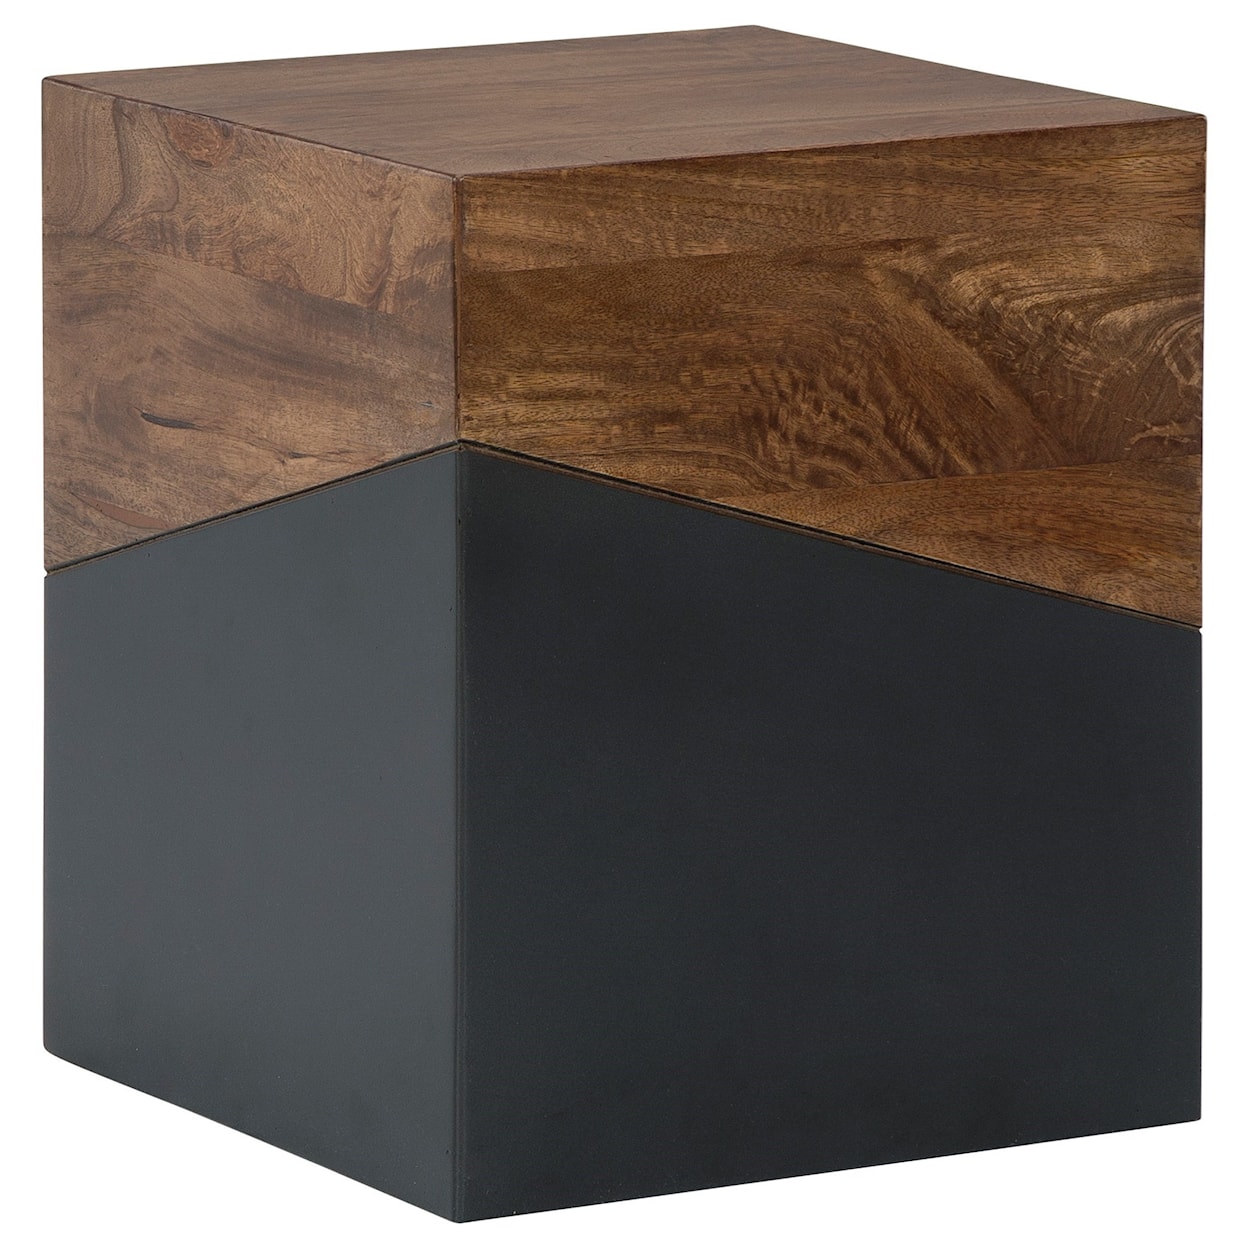 Benchcraft Trailbend Accent Table